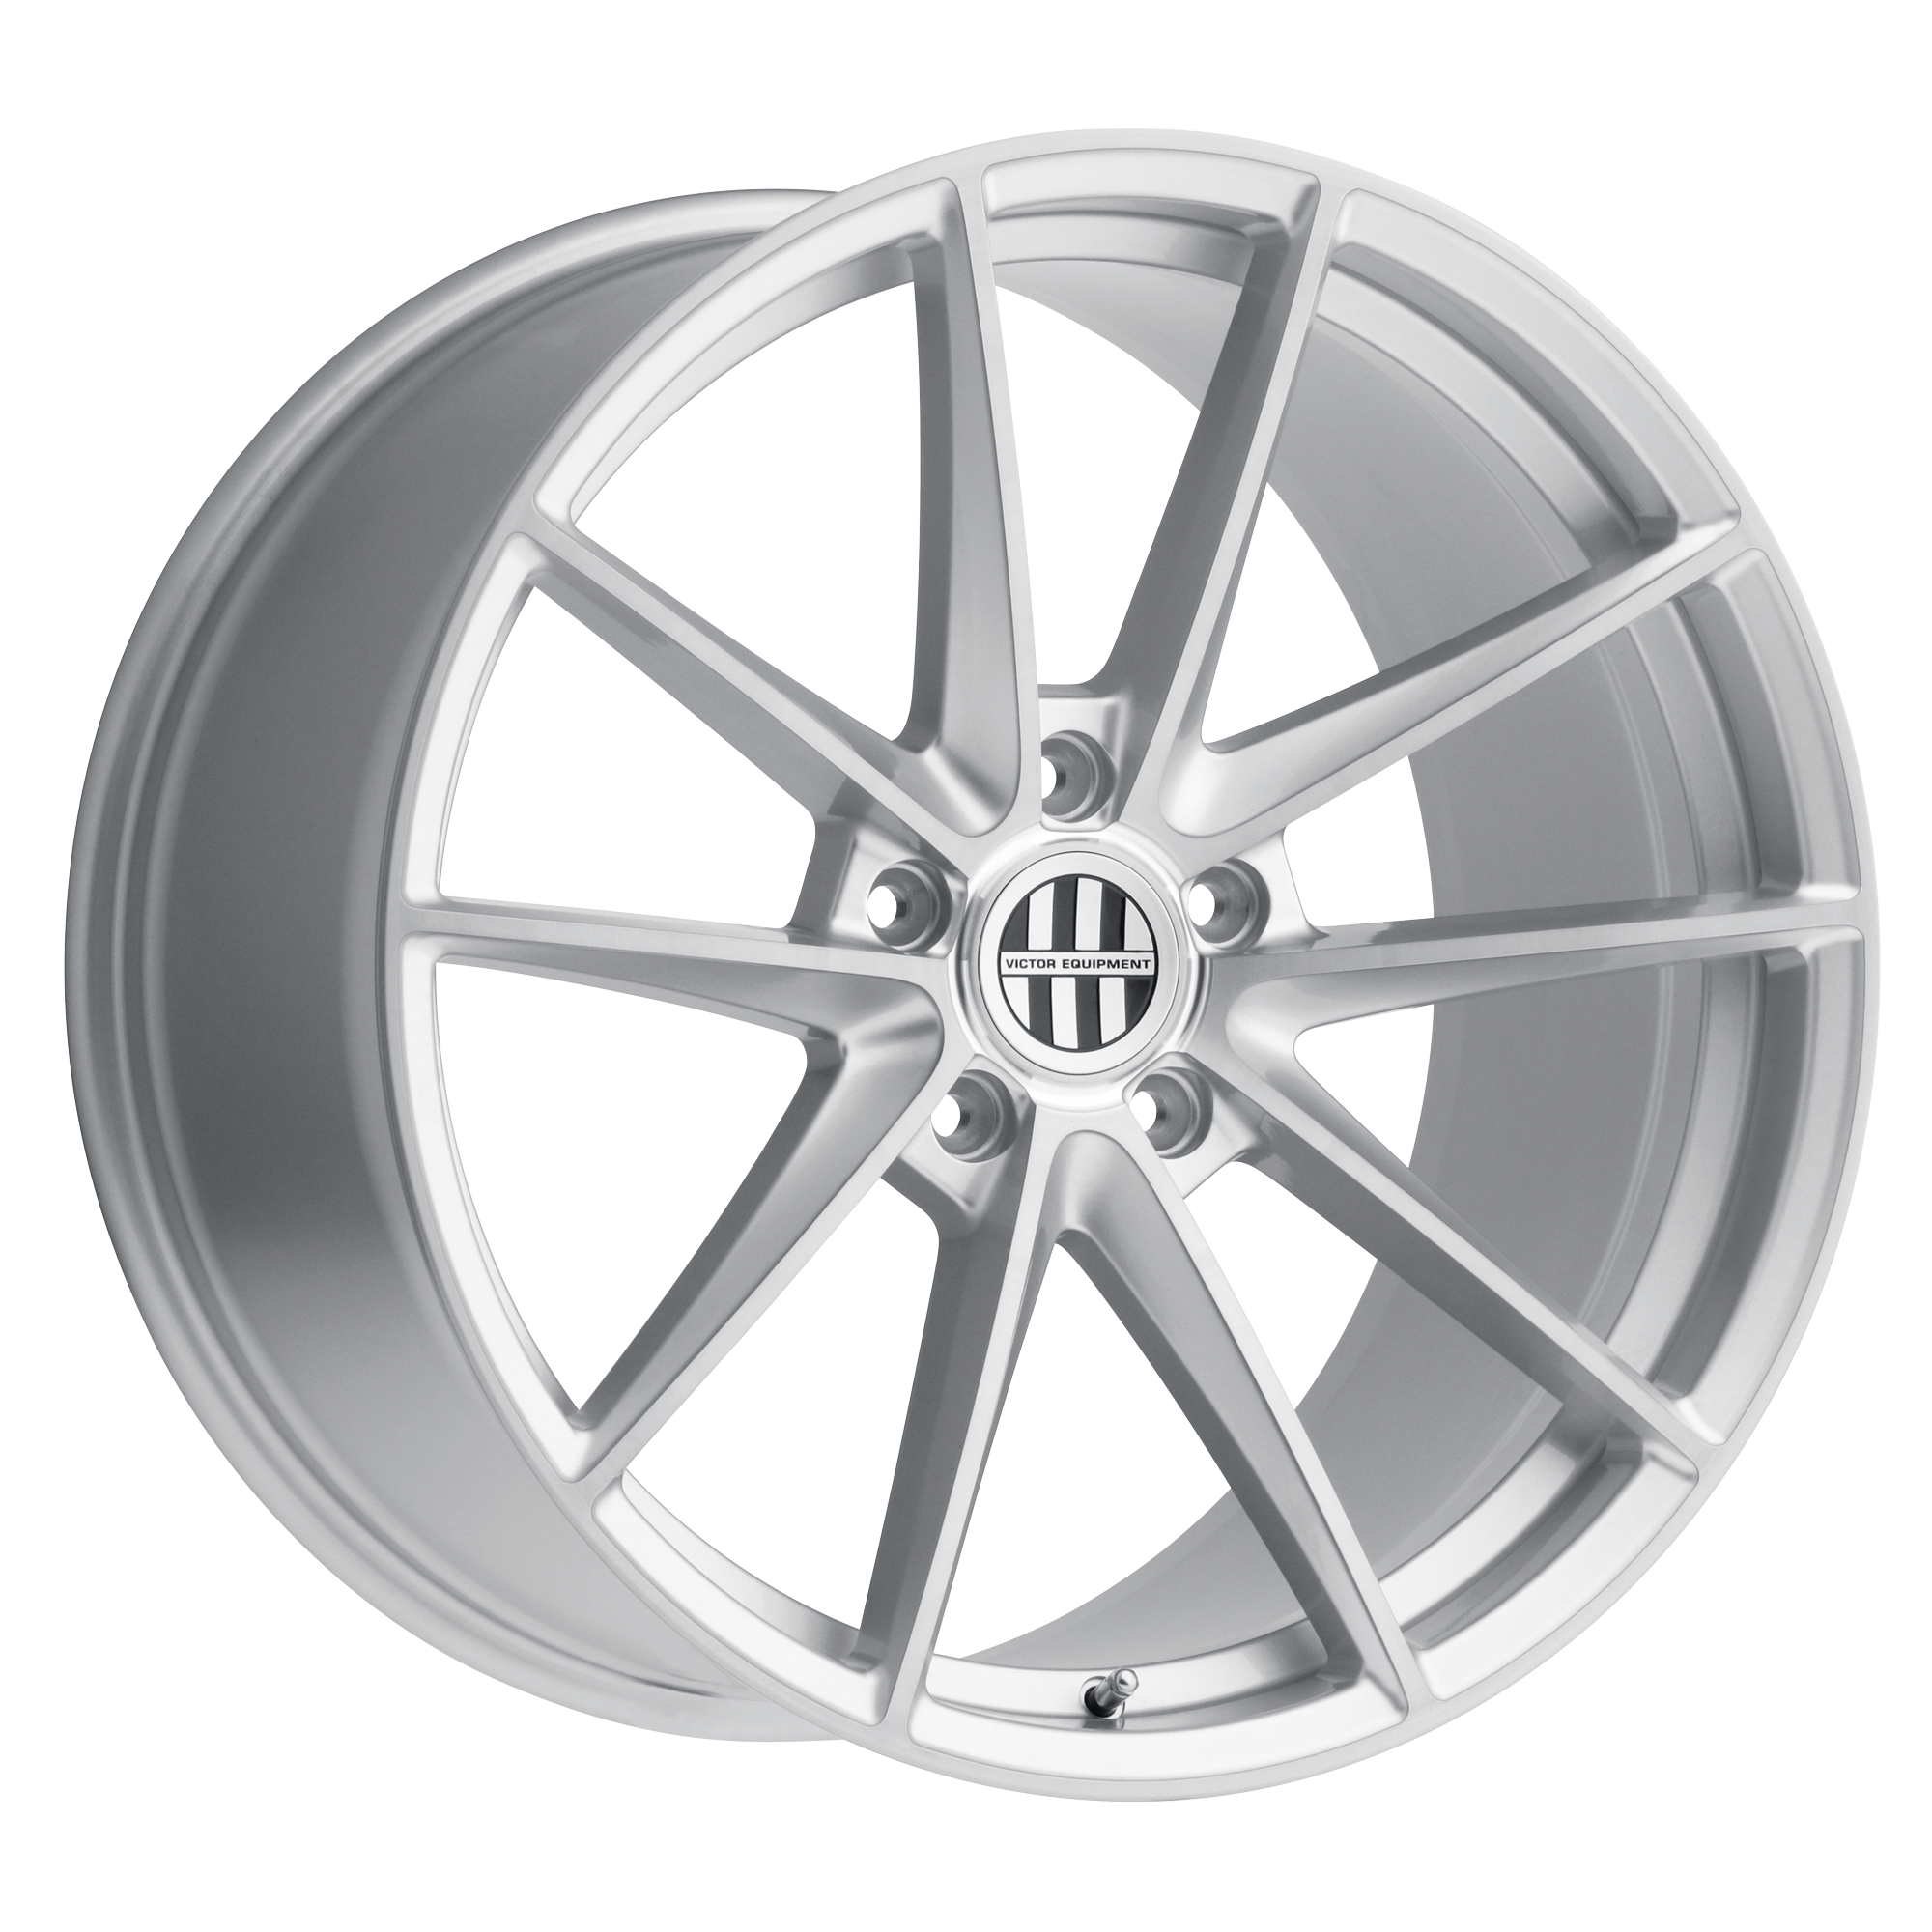 VICTOR EQUIPMENT ZUFFEN SILVER W/ BRUSHED FACE WHEELS | 18X11 | 5X130 | OFFSET: 36MM | CB: 71.5MM